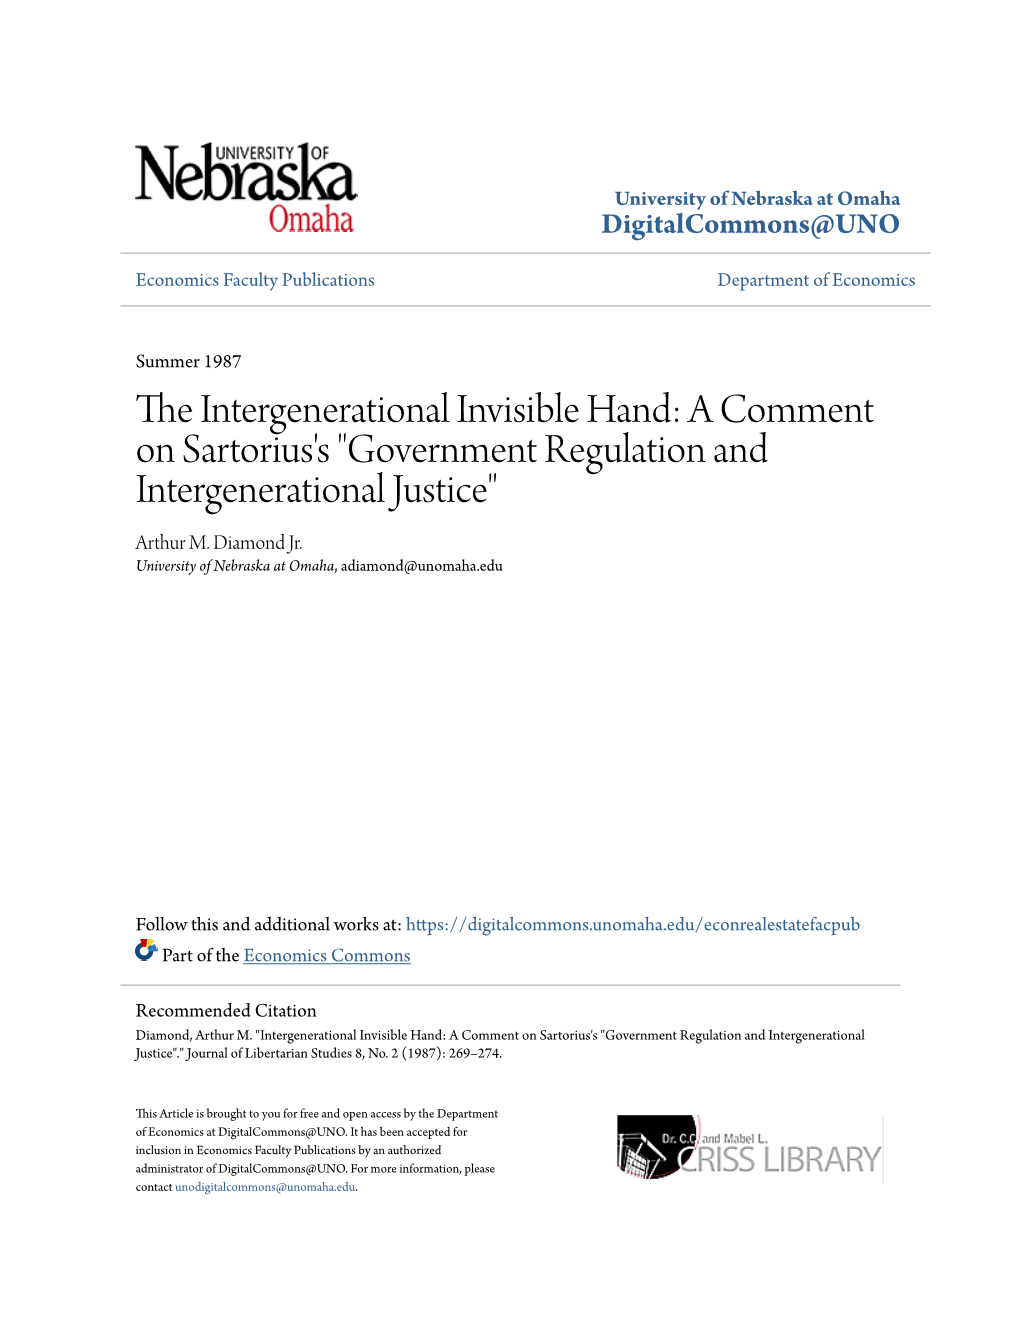 The Intergenerational Invisible Hand: a Comment on Sartorius's "Government Regulation and Intergenerational Justice"